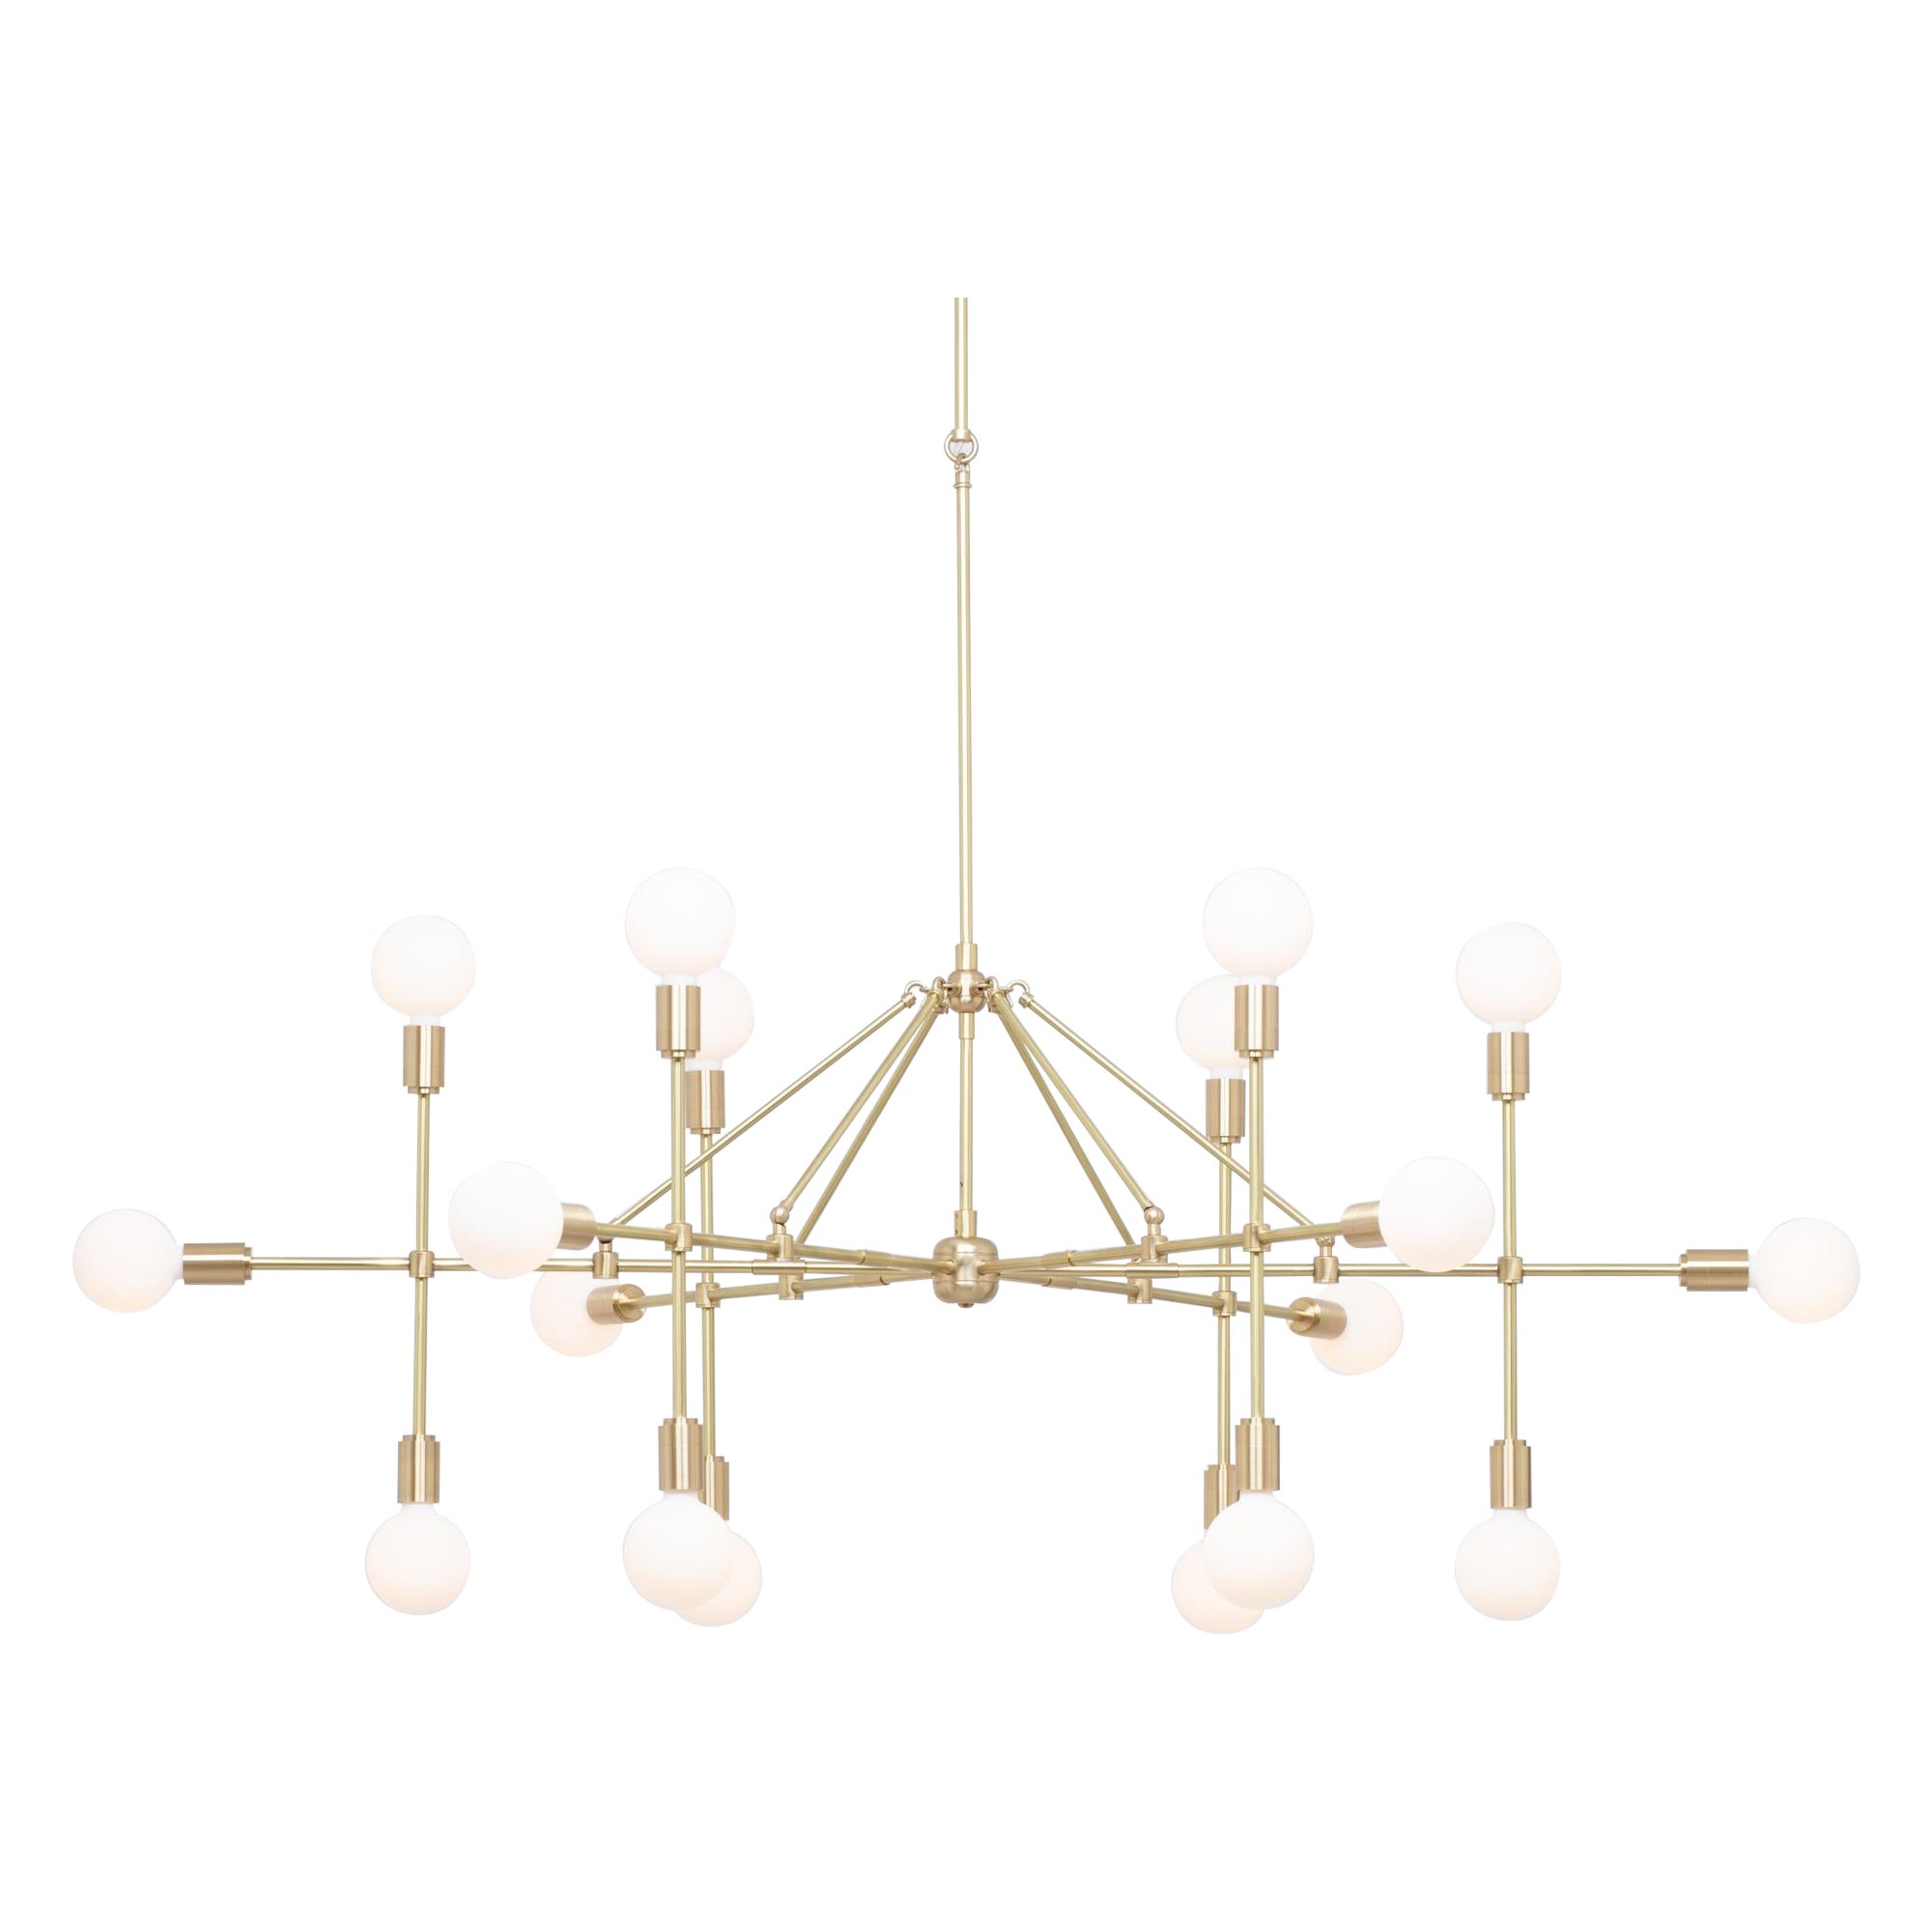 Six Arm Eighteen Sphere Lobby Chandelier by Lights of London For Sale